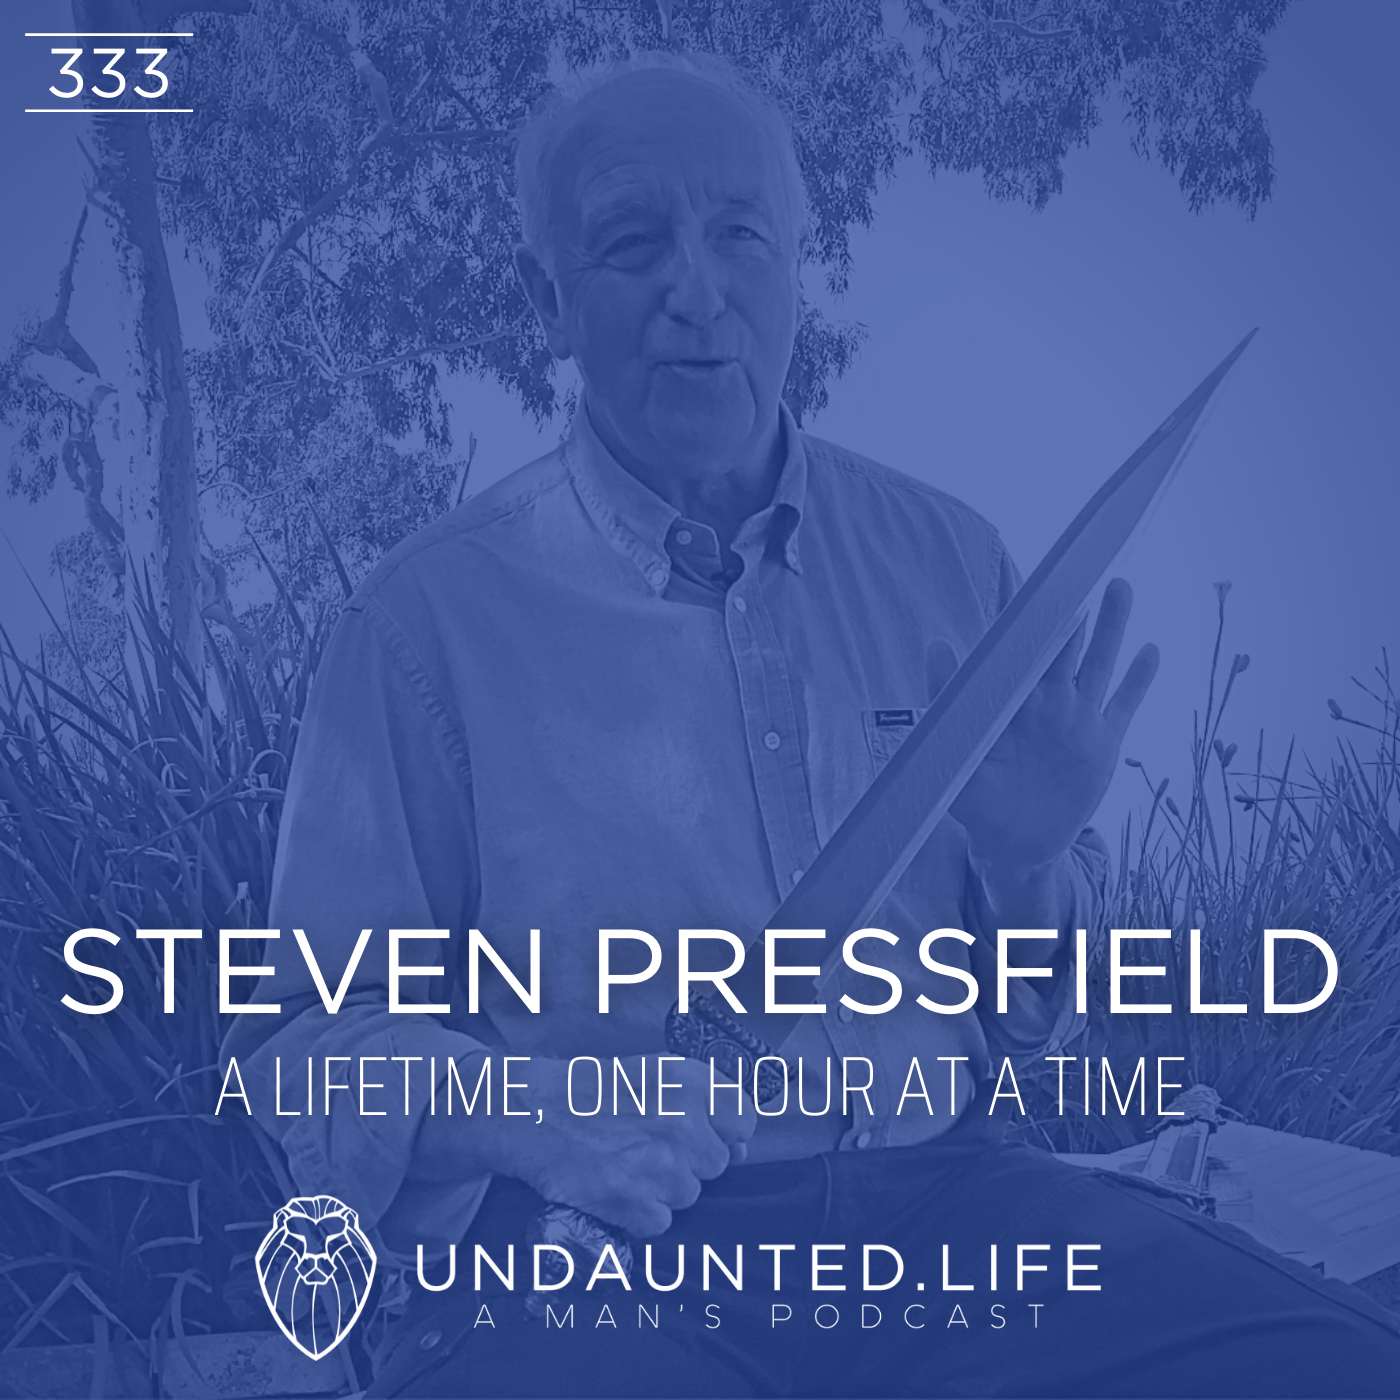 STEVEN PRESSFIELD  Put Your Ass Where Your Heart Wants to Be - Order of Man